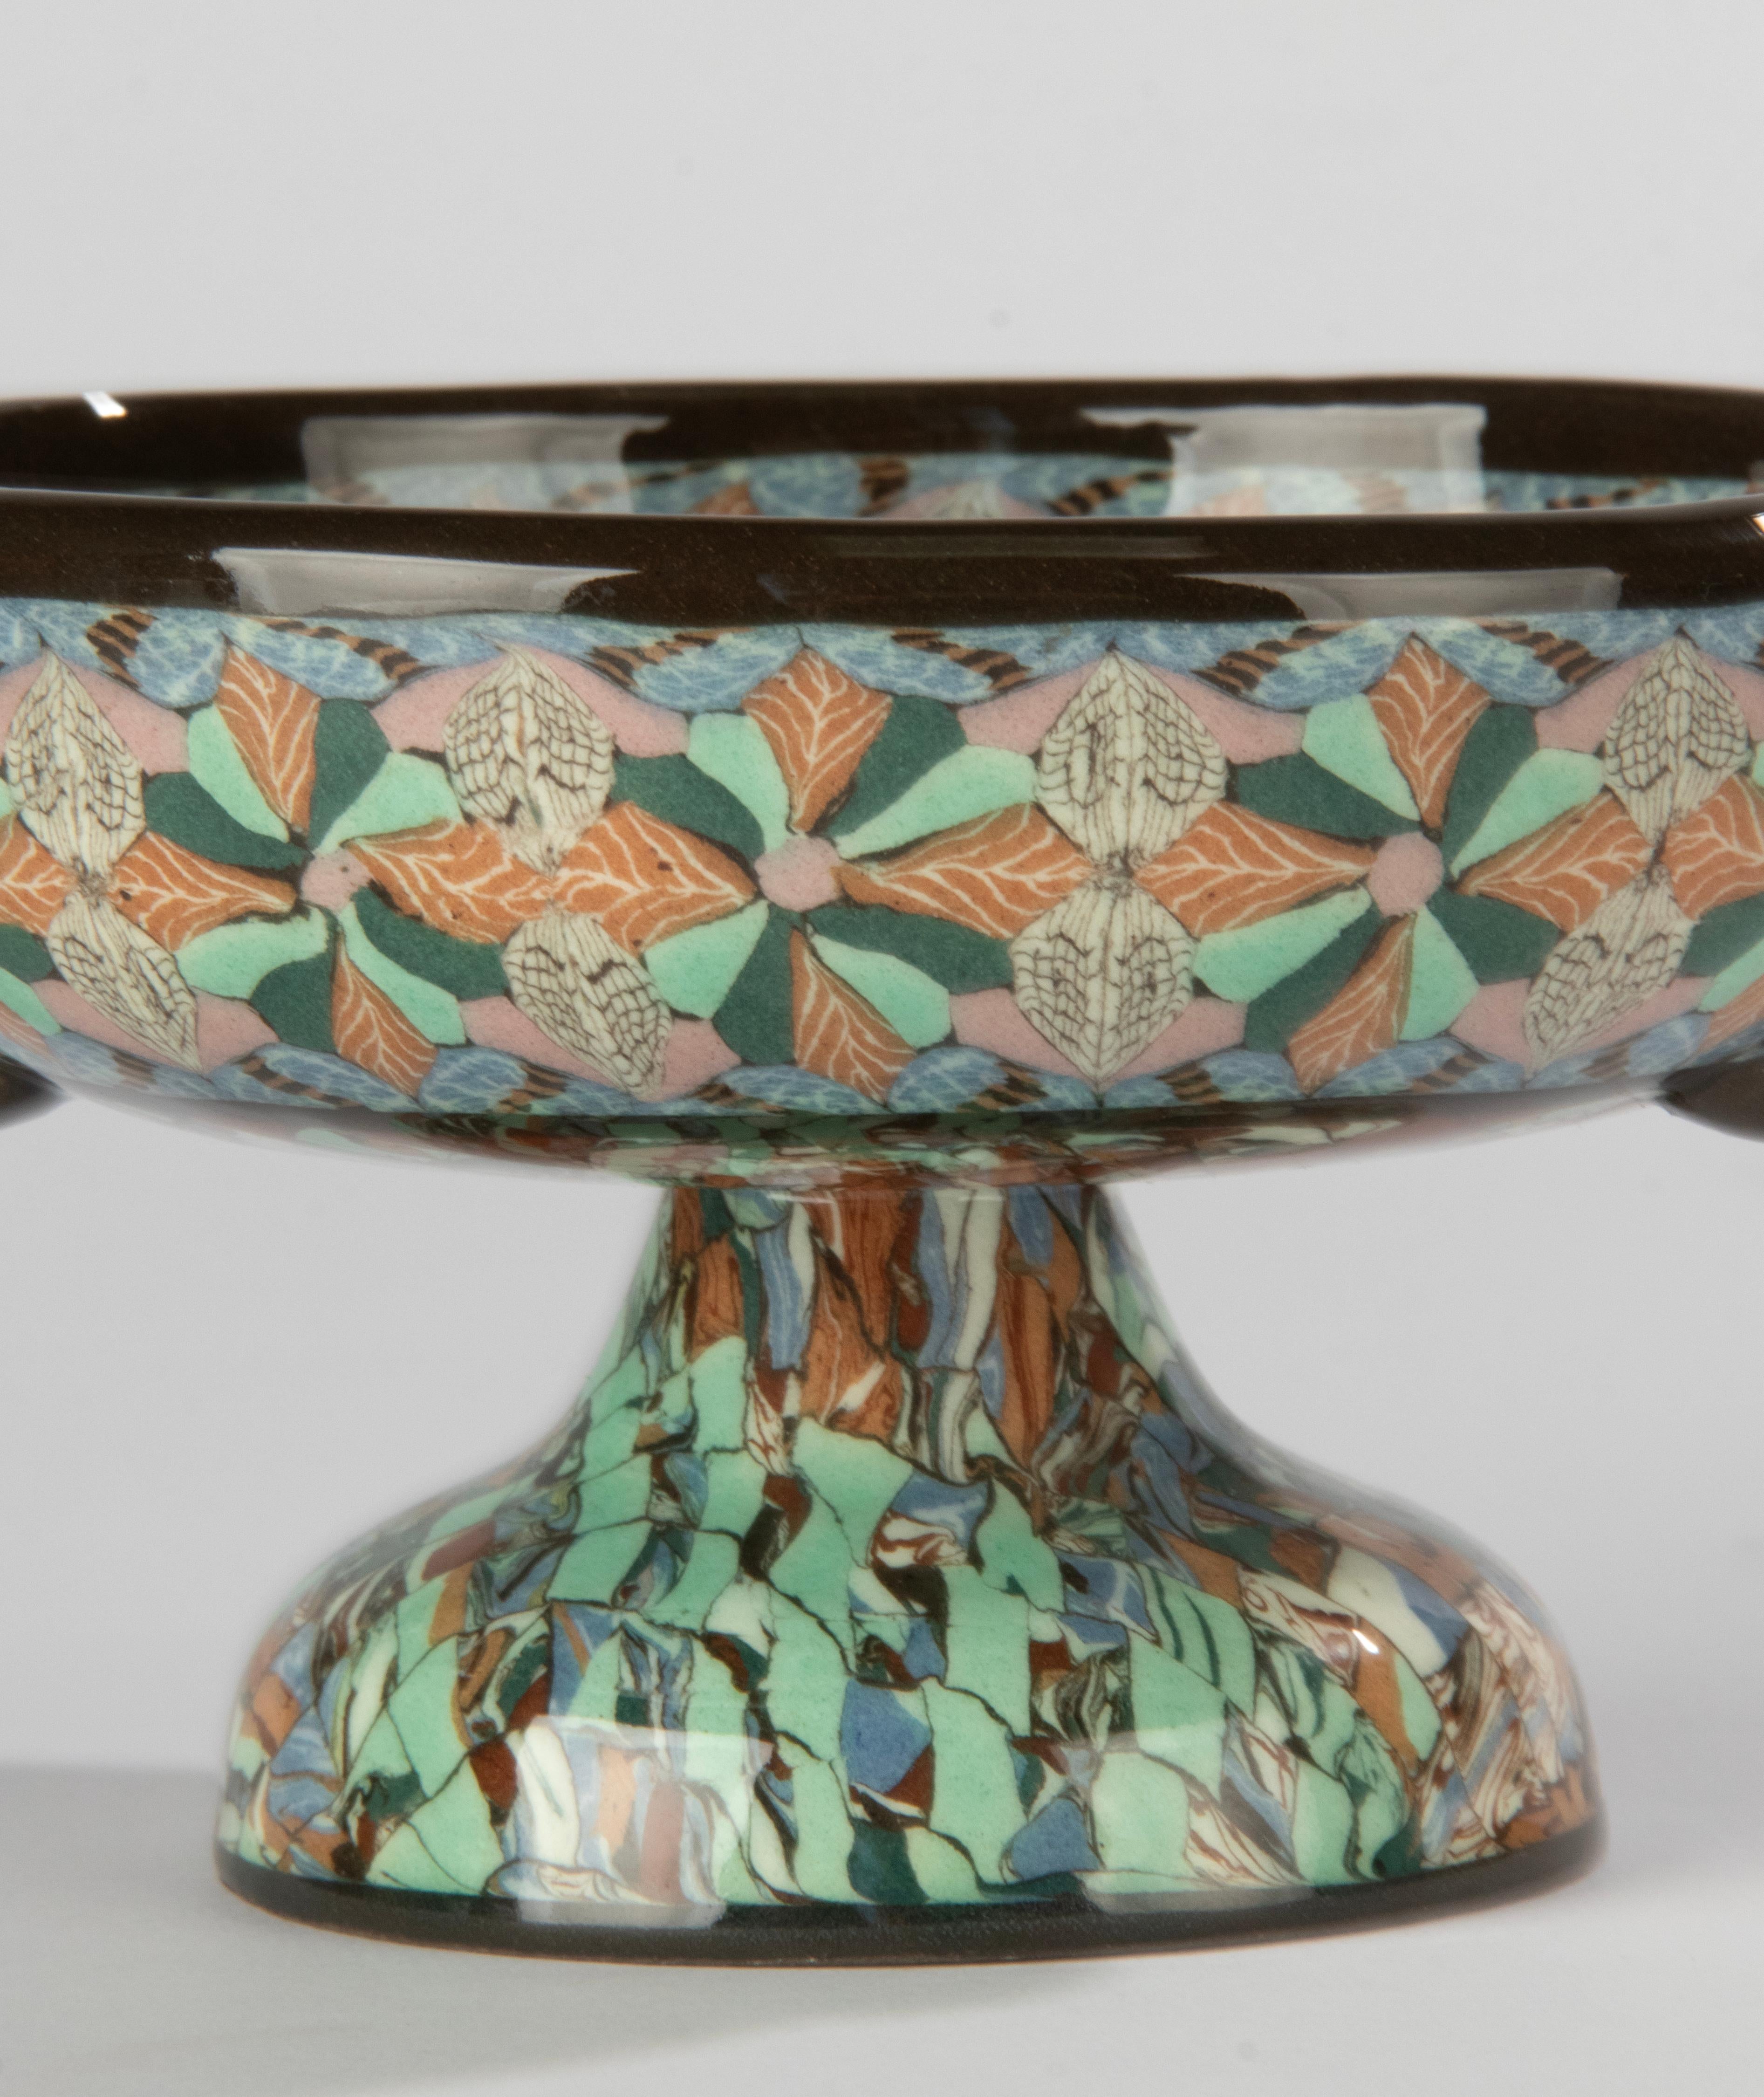 A beautiful ceramic coupe, designed by Jean Gerbino for Vallauris. Nice design and colors in the characteristic style of Jean Gerbino. The bowl is marked on the bottom.
It is in very good condition. No chips and no hairlines. Beautiful glossy glaze